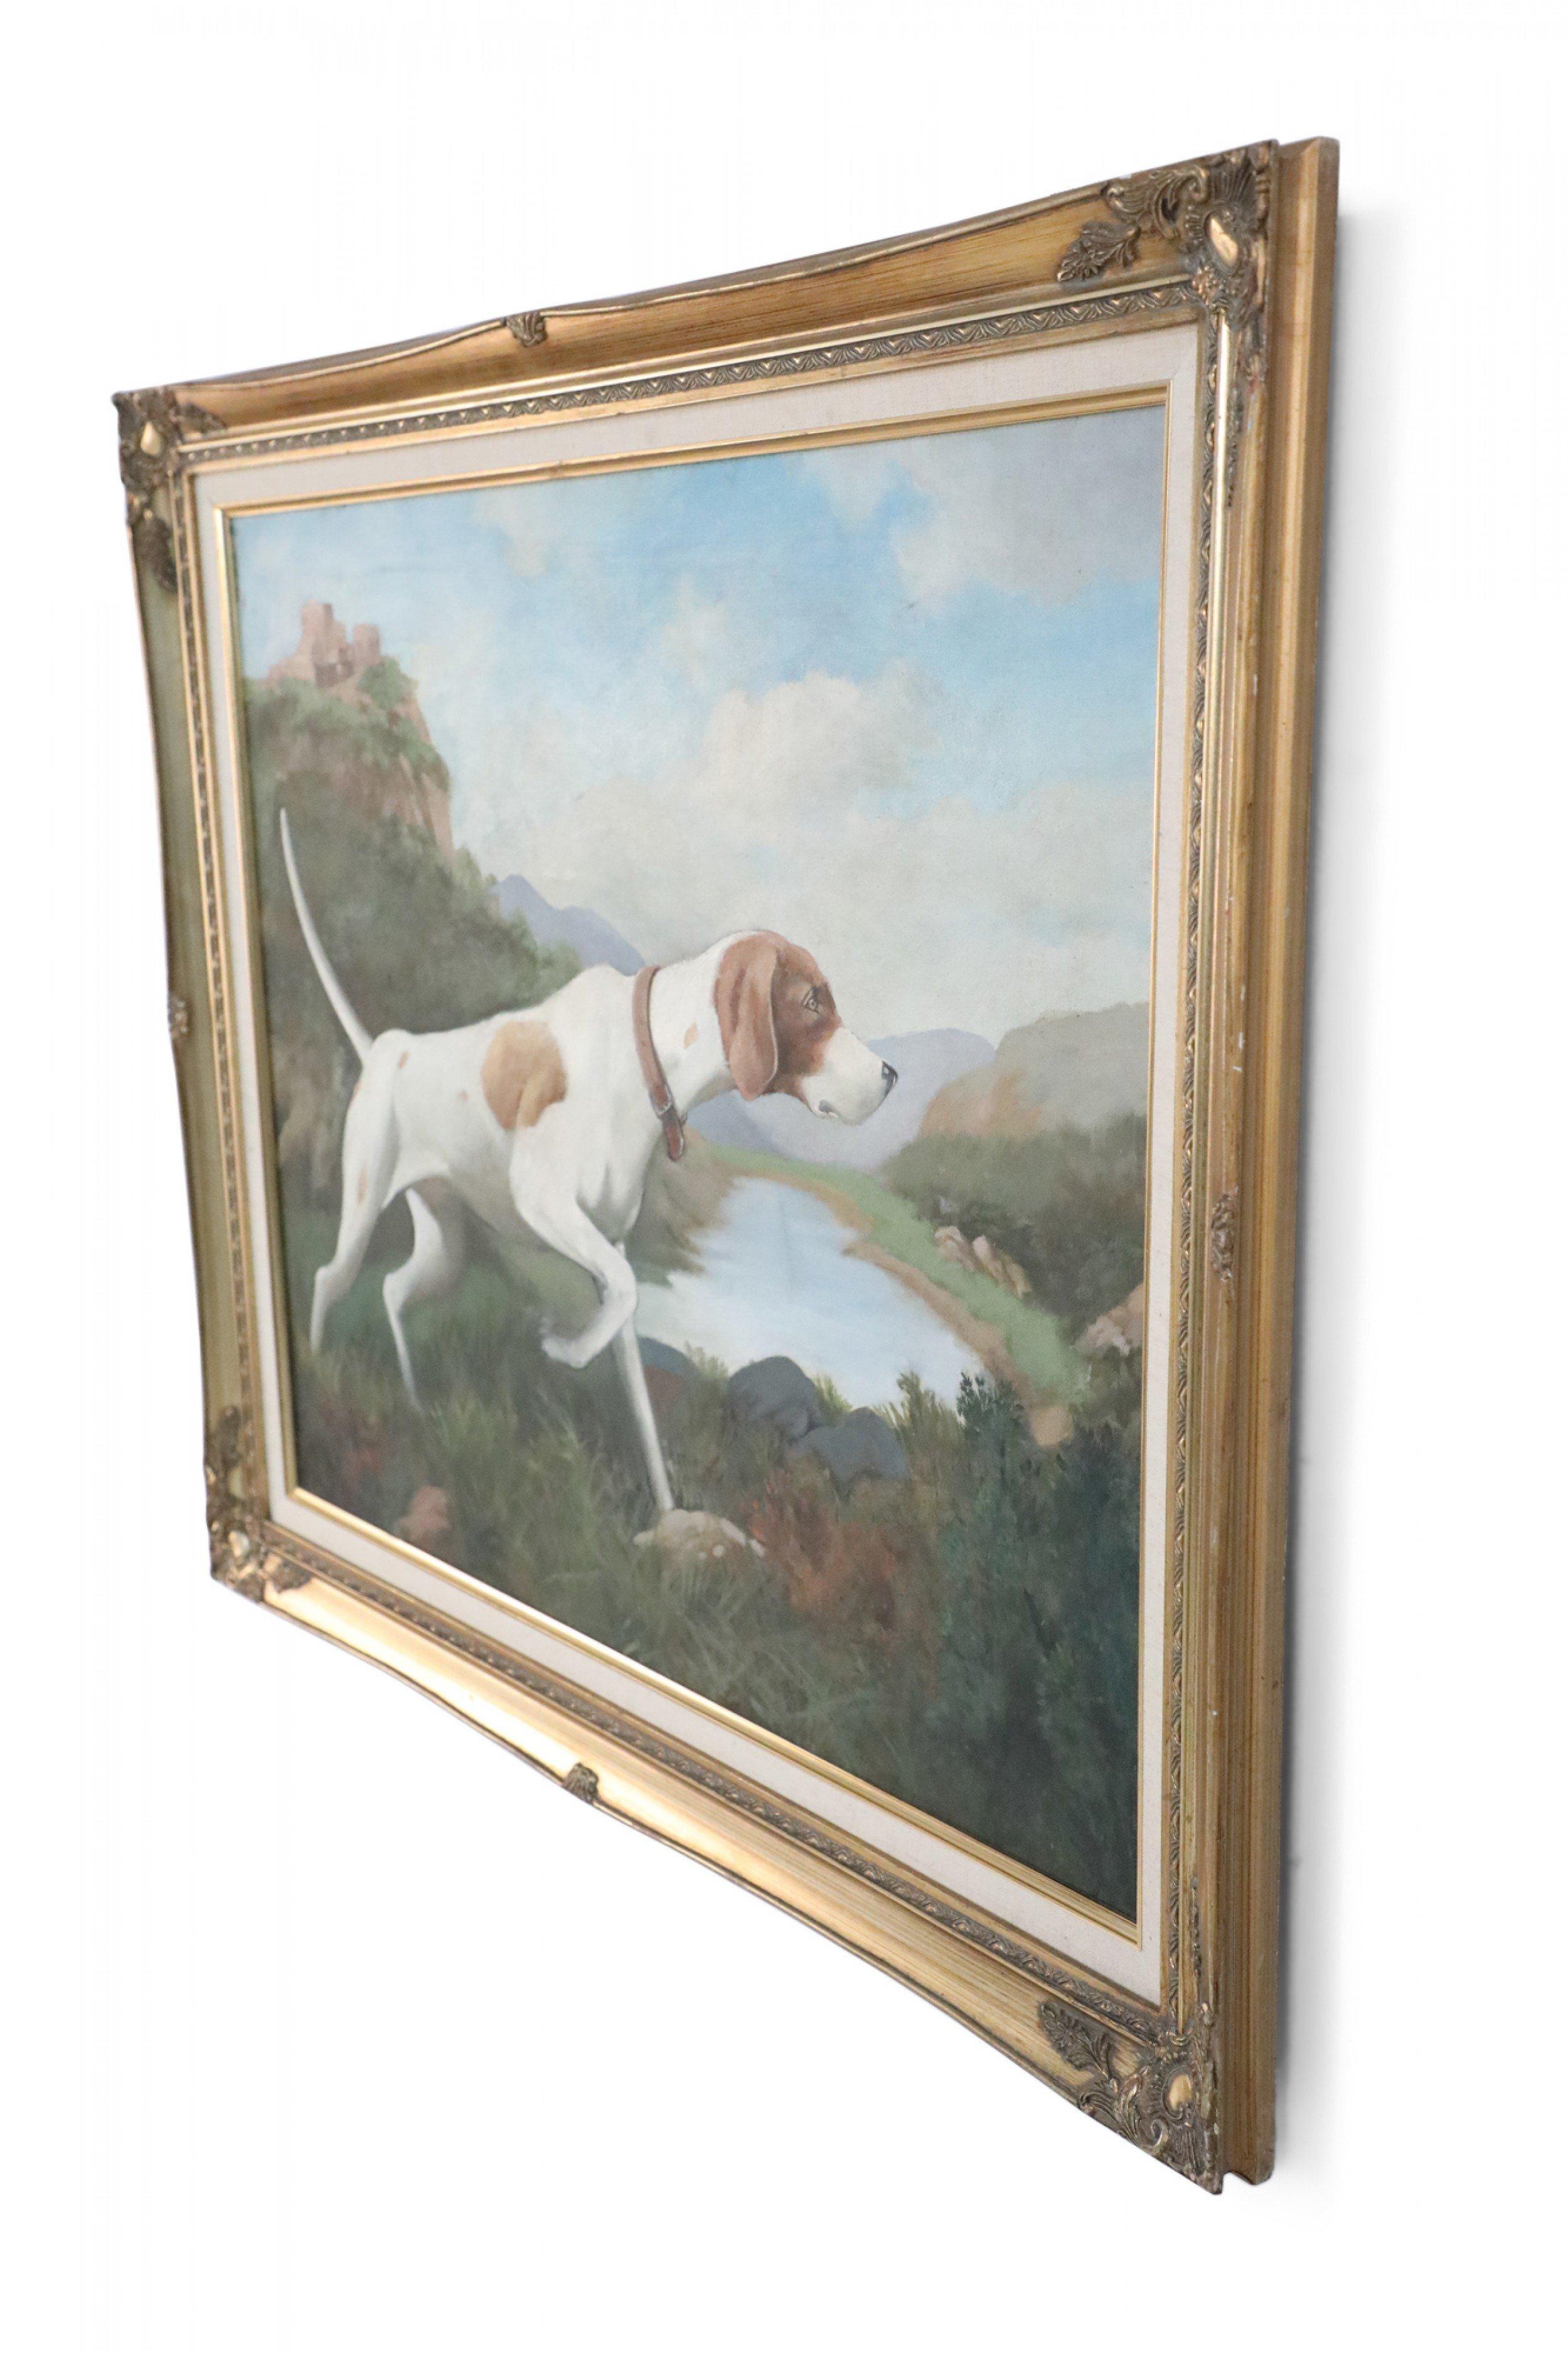 Vintage (20th Century) gold-framed painting of a brown and white hunting dog captured in a pointing stance, with a lake in the background and village in the distance.